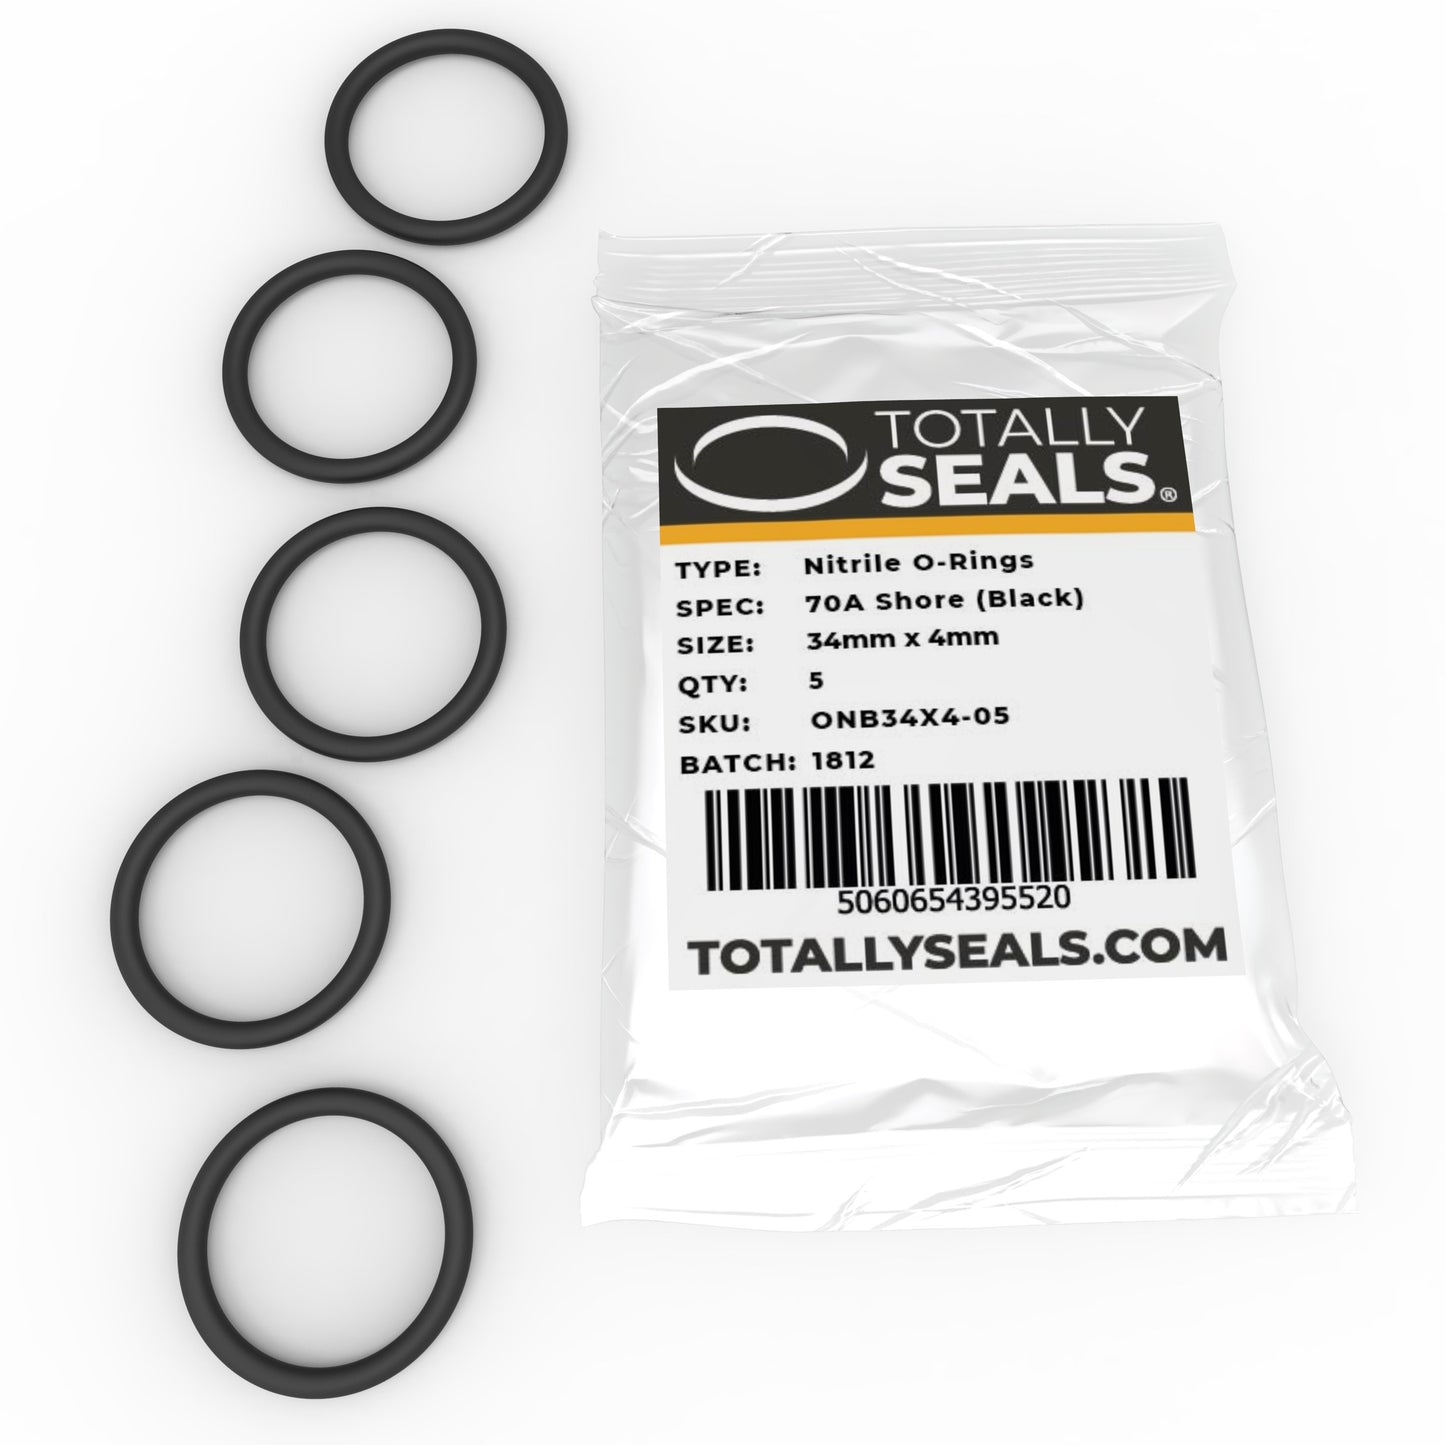 34mm x 4mm (42mm OD) Nitrile O-Rings - Totally Seals®